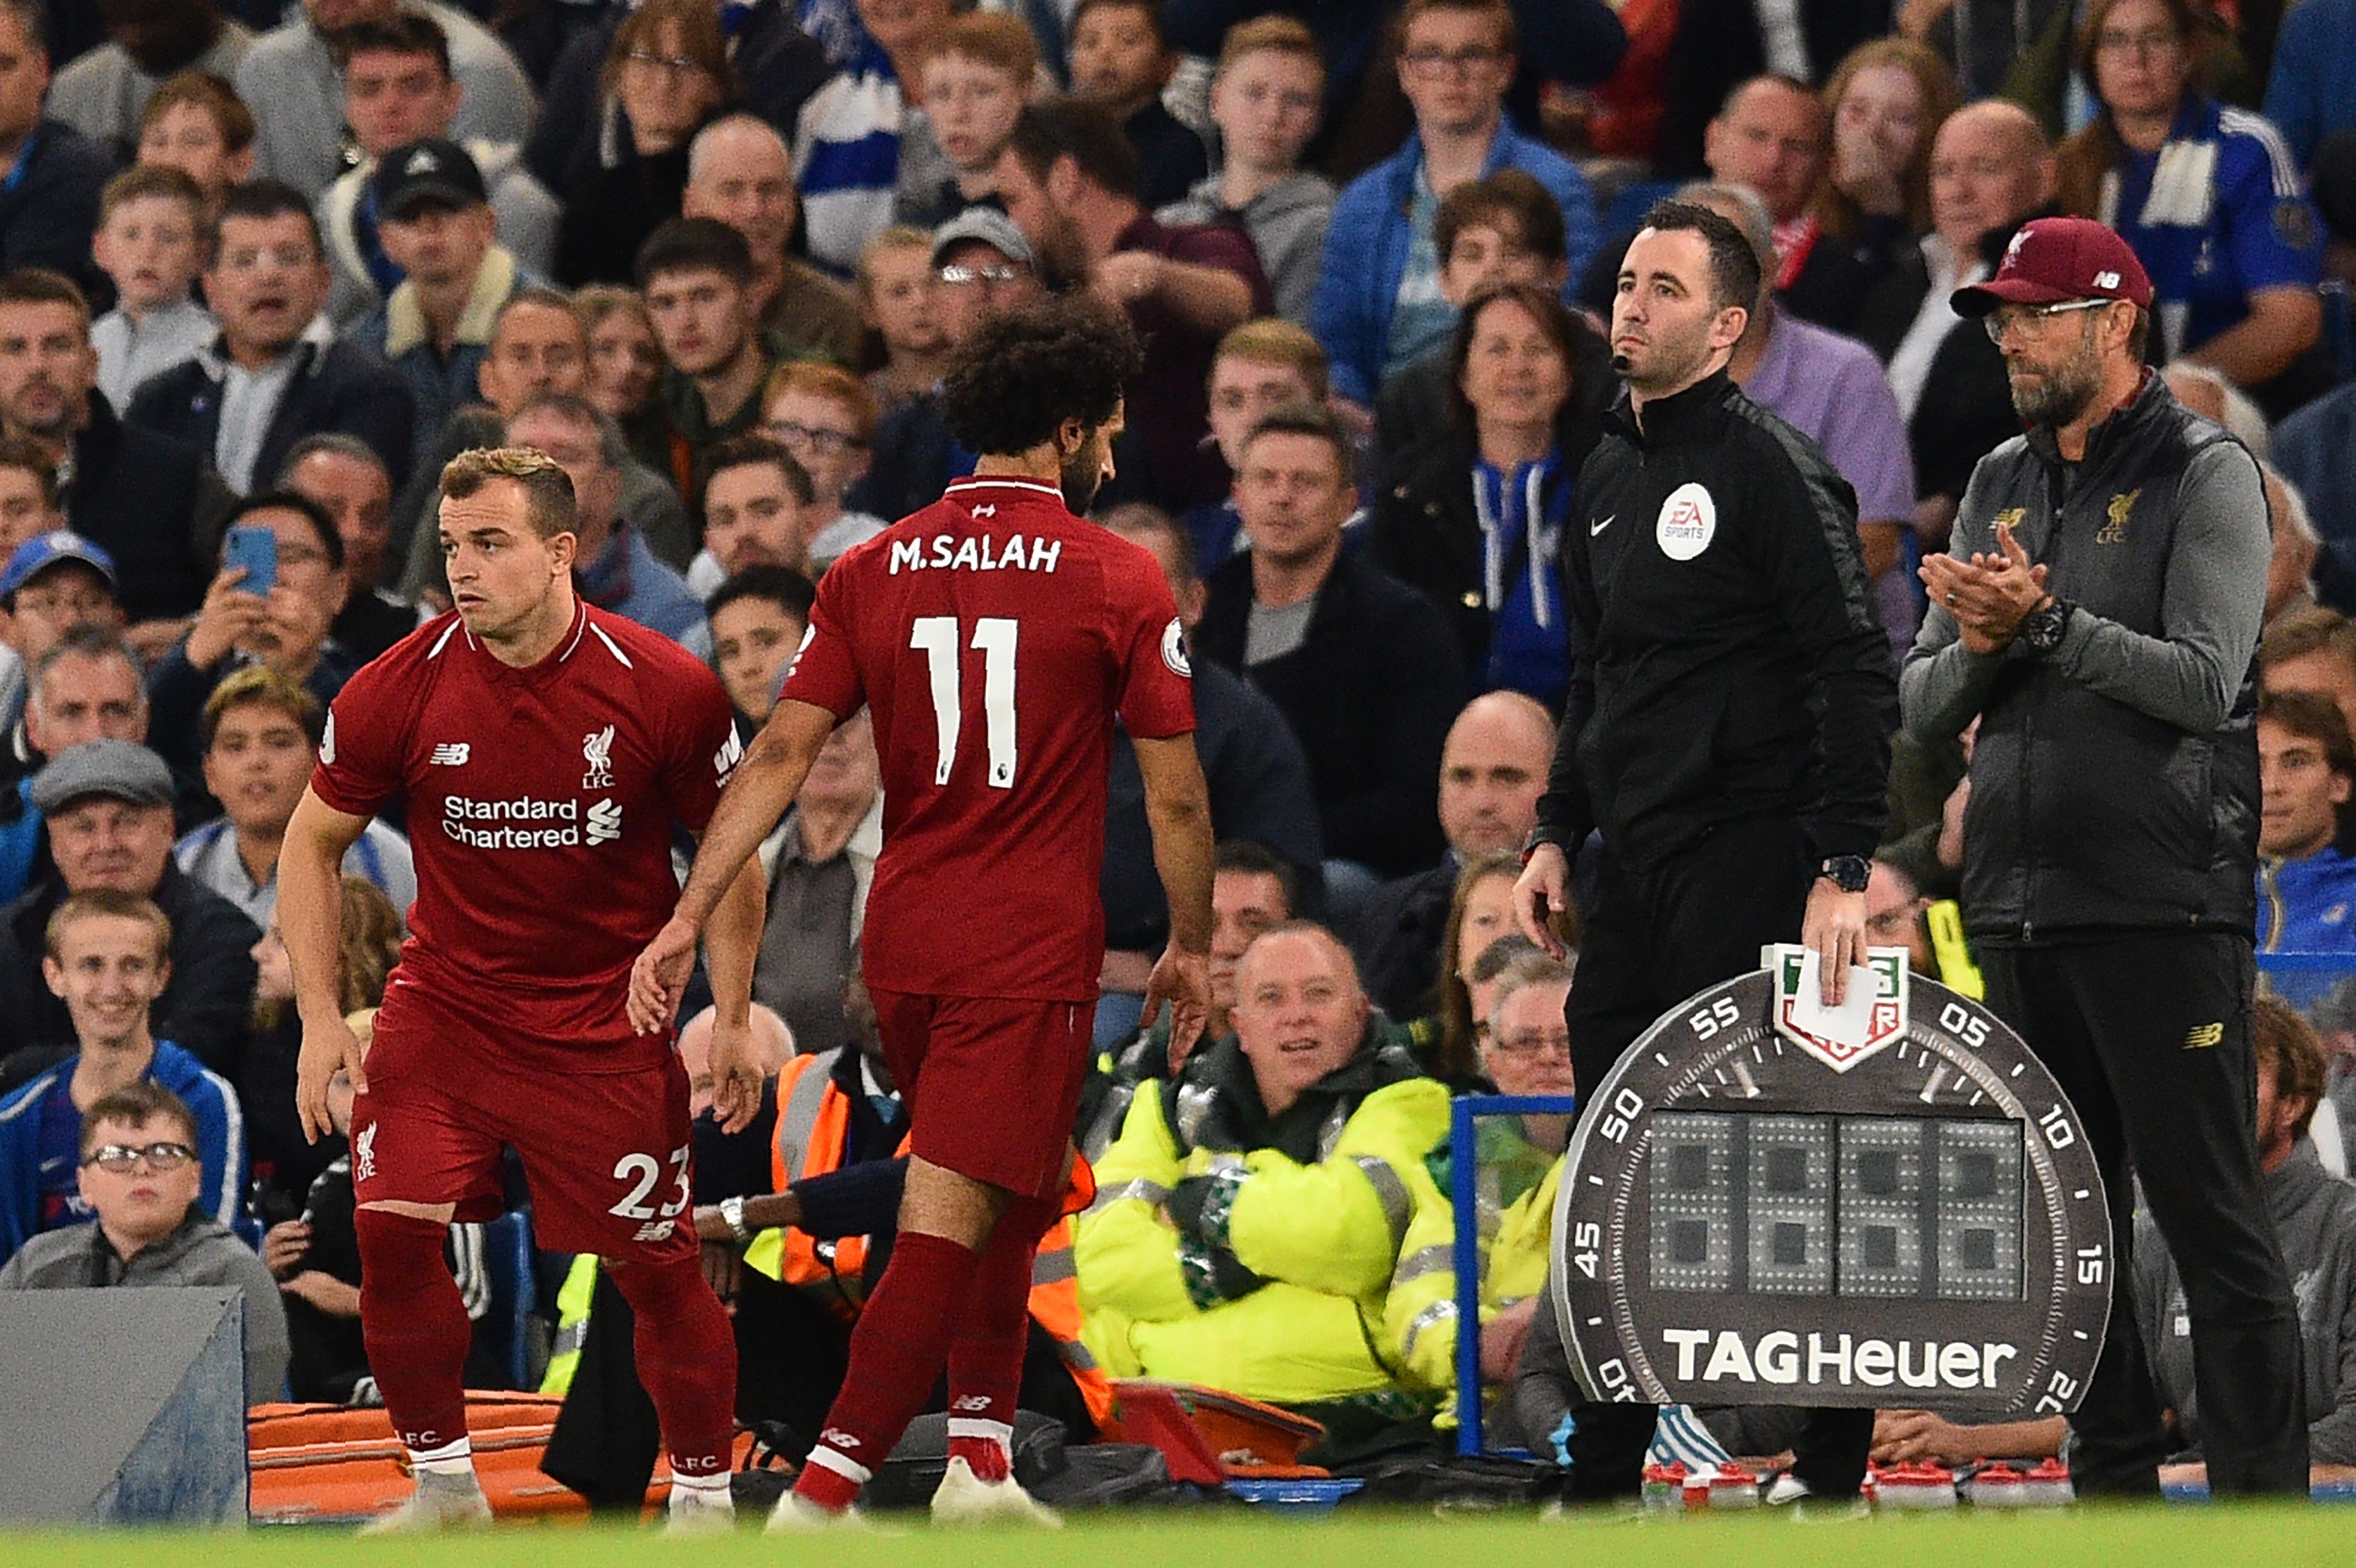 Liverpool's Swiss midfielder Xherdan Shaqiri (L) substitutes Liverpool's Egyptian midfielder Mohamed Salah (2L) as Liverpool's German manager Jurgen Klopp (R) looks on during the English Premier League football match between Chelsea and Liverpool at Stamford Bridge in London on September 29, 2018. (Photo by Glyn KIRK / AFP) / RESTRICTED TO EDITORIAL USE. No use with unauthorized audio, video, data, fixture lists, club/league logos or 'live' services. Online in-match use limited to 120 images. An additional 40 images may be used in extra time. No video emulation. Social media in-match use limited to 120 images. An additional 40 images may be used in extra time. No use in betting publications, games or single club/league/player publications. /         (Photo credit should read GLYN KIRK/AFP/Getty Images)